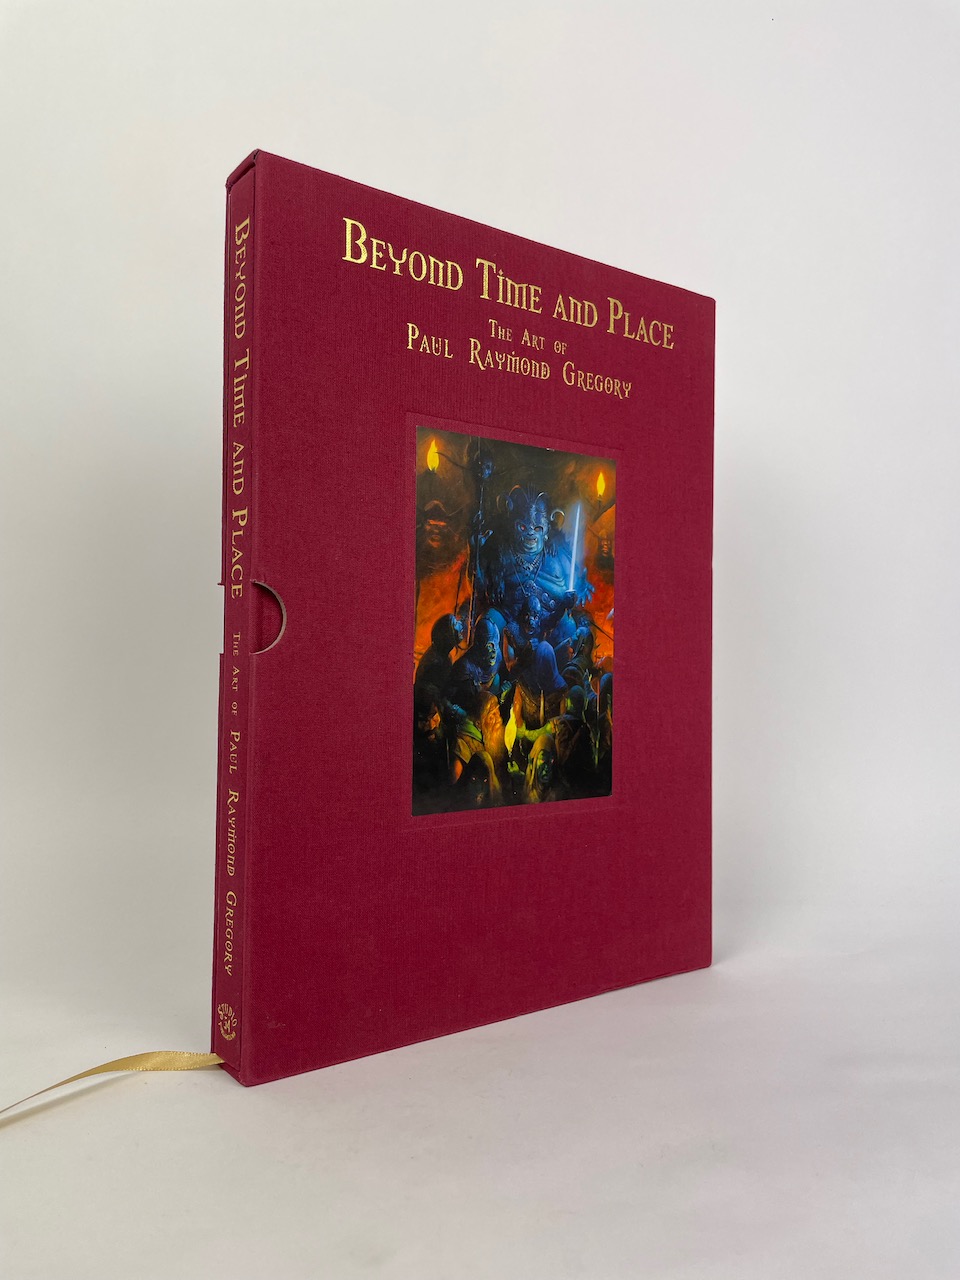 Beyond Time and Place The Art of Paul Raymond Gregory - Limited Edition Book